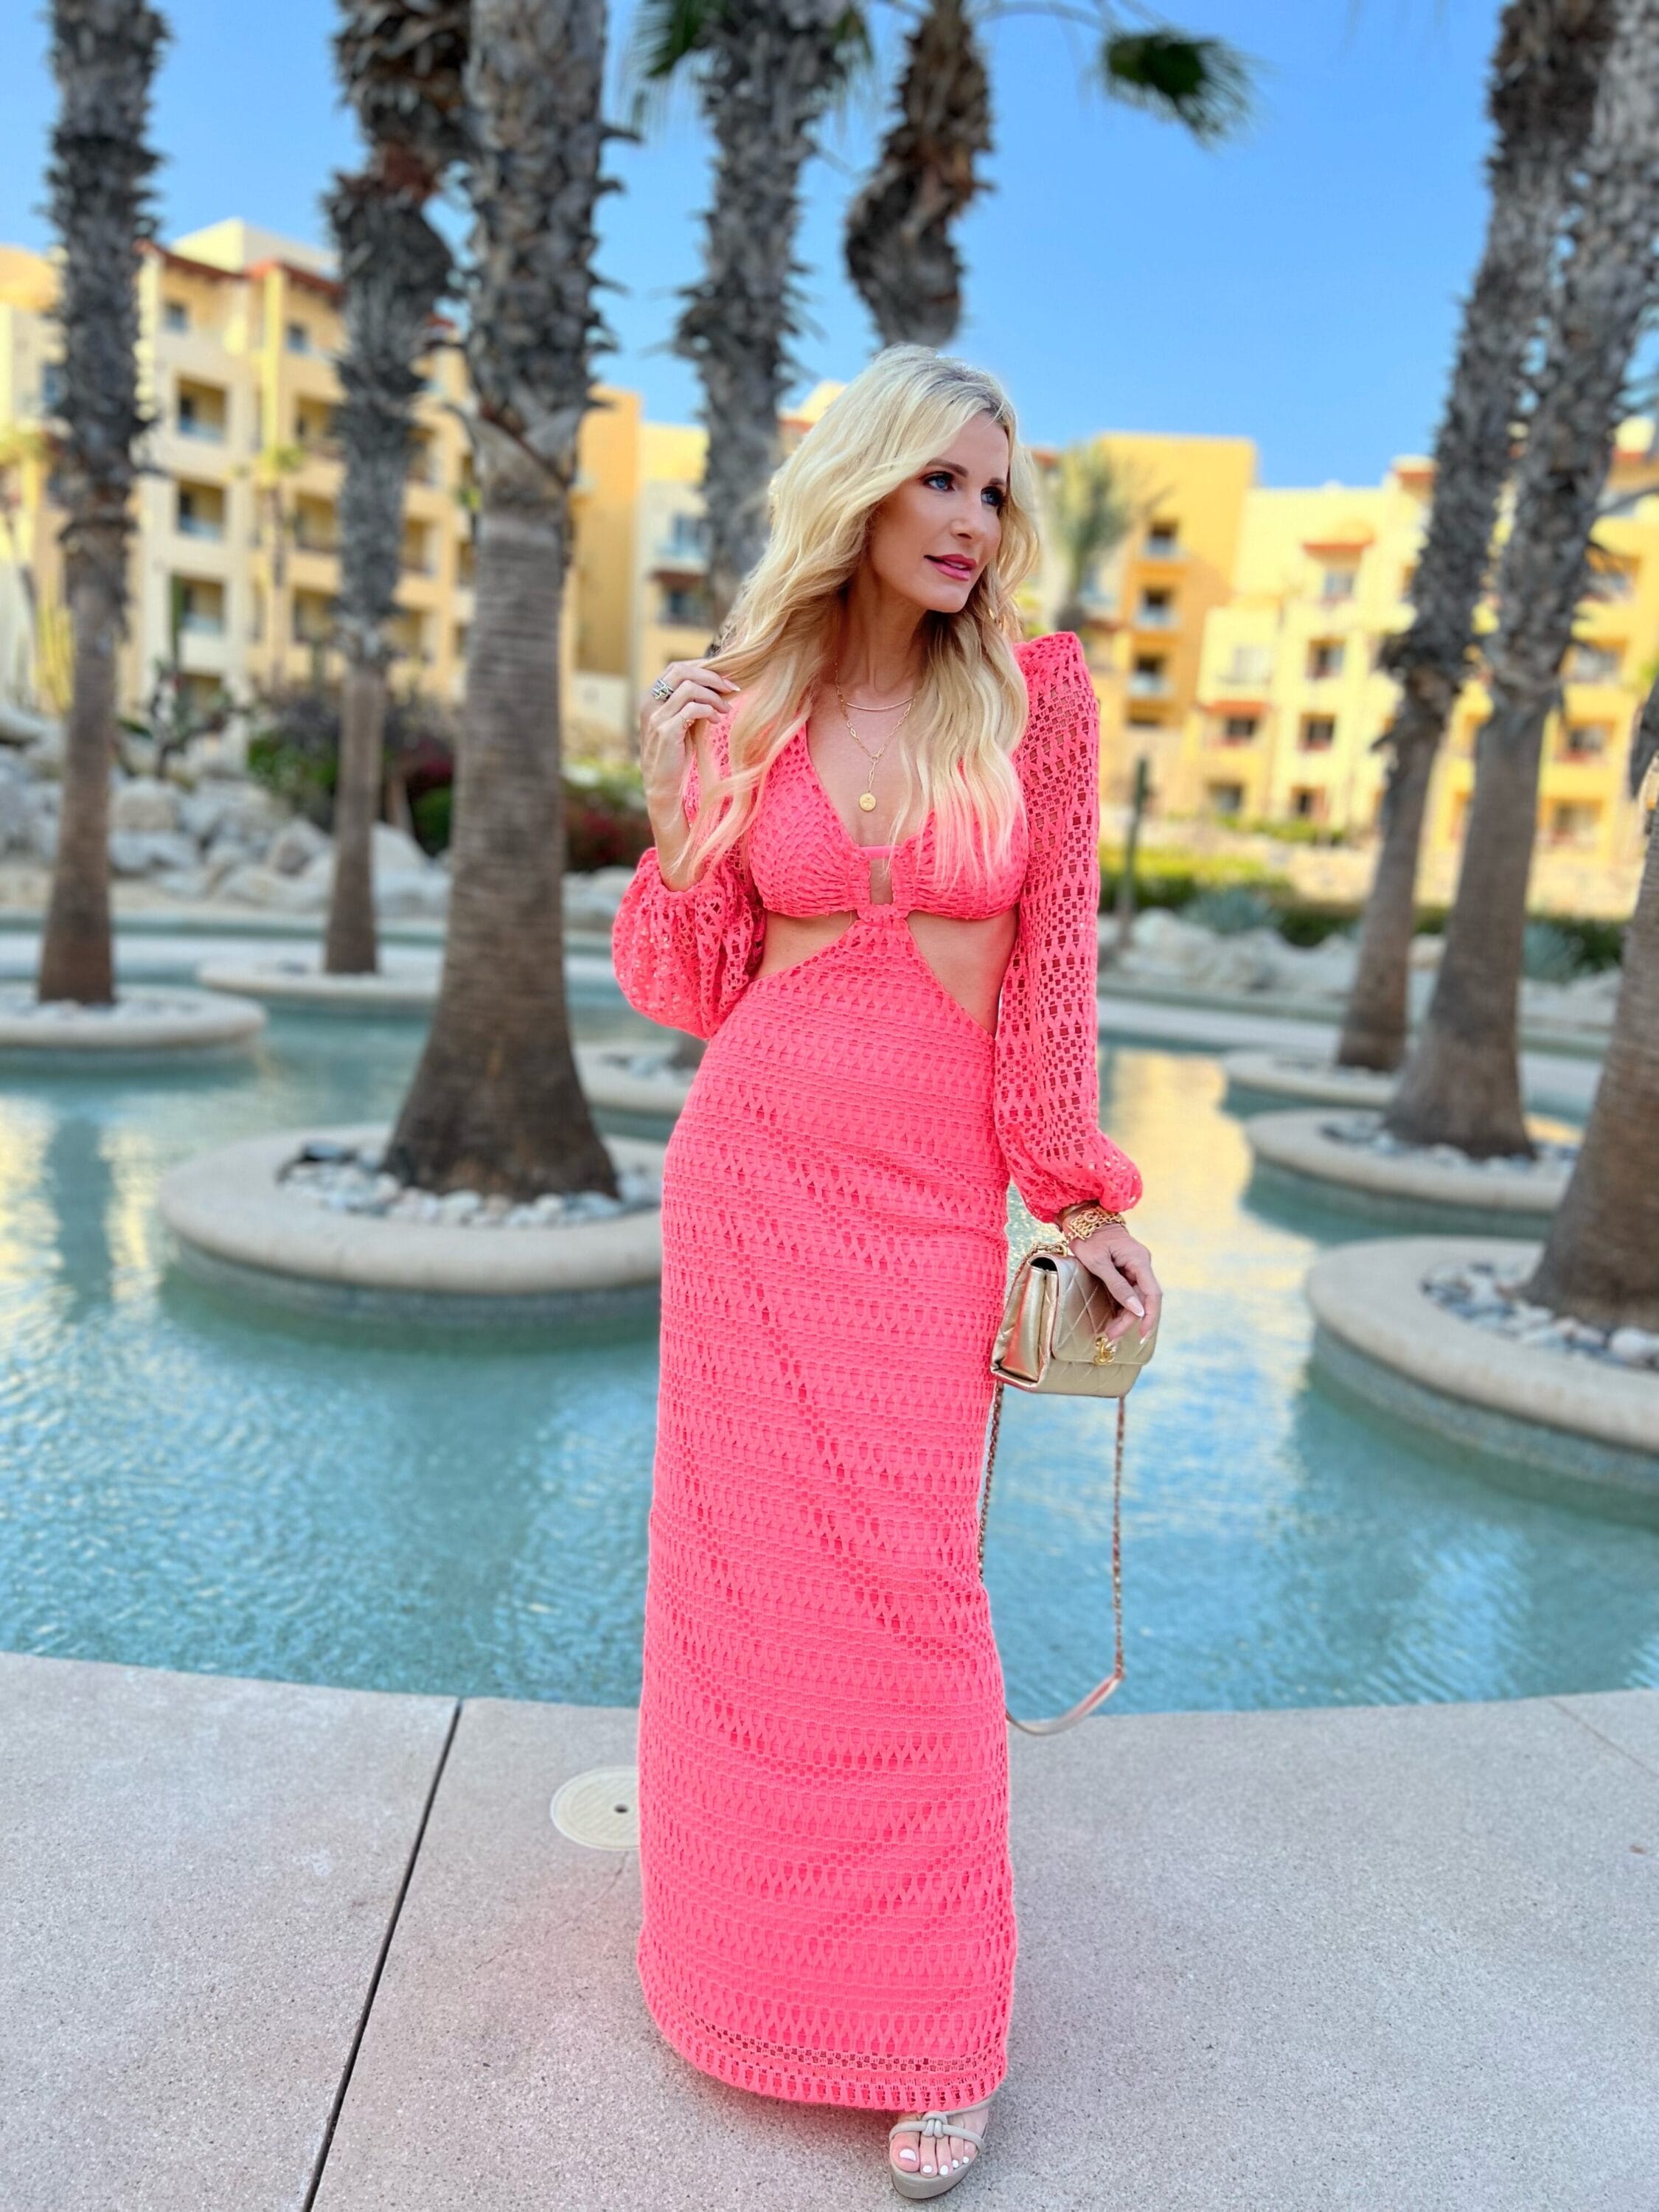 Dallas fashion blogger wearing pink crochet cut out maxi dress as example of chic vacation looks